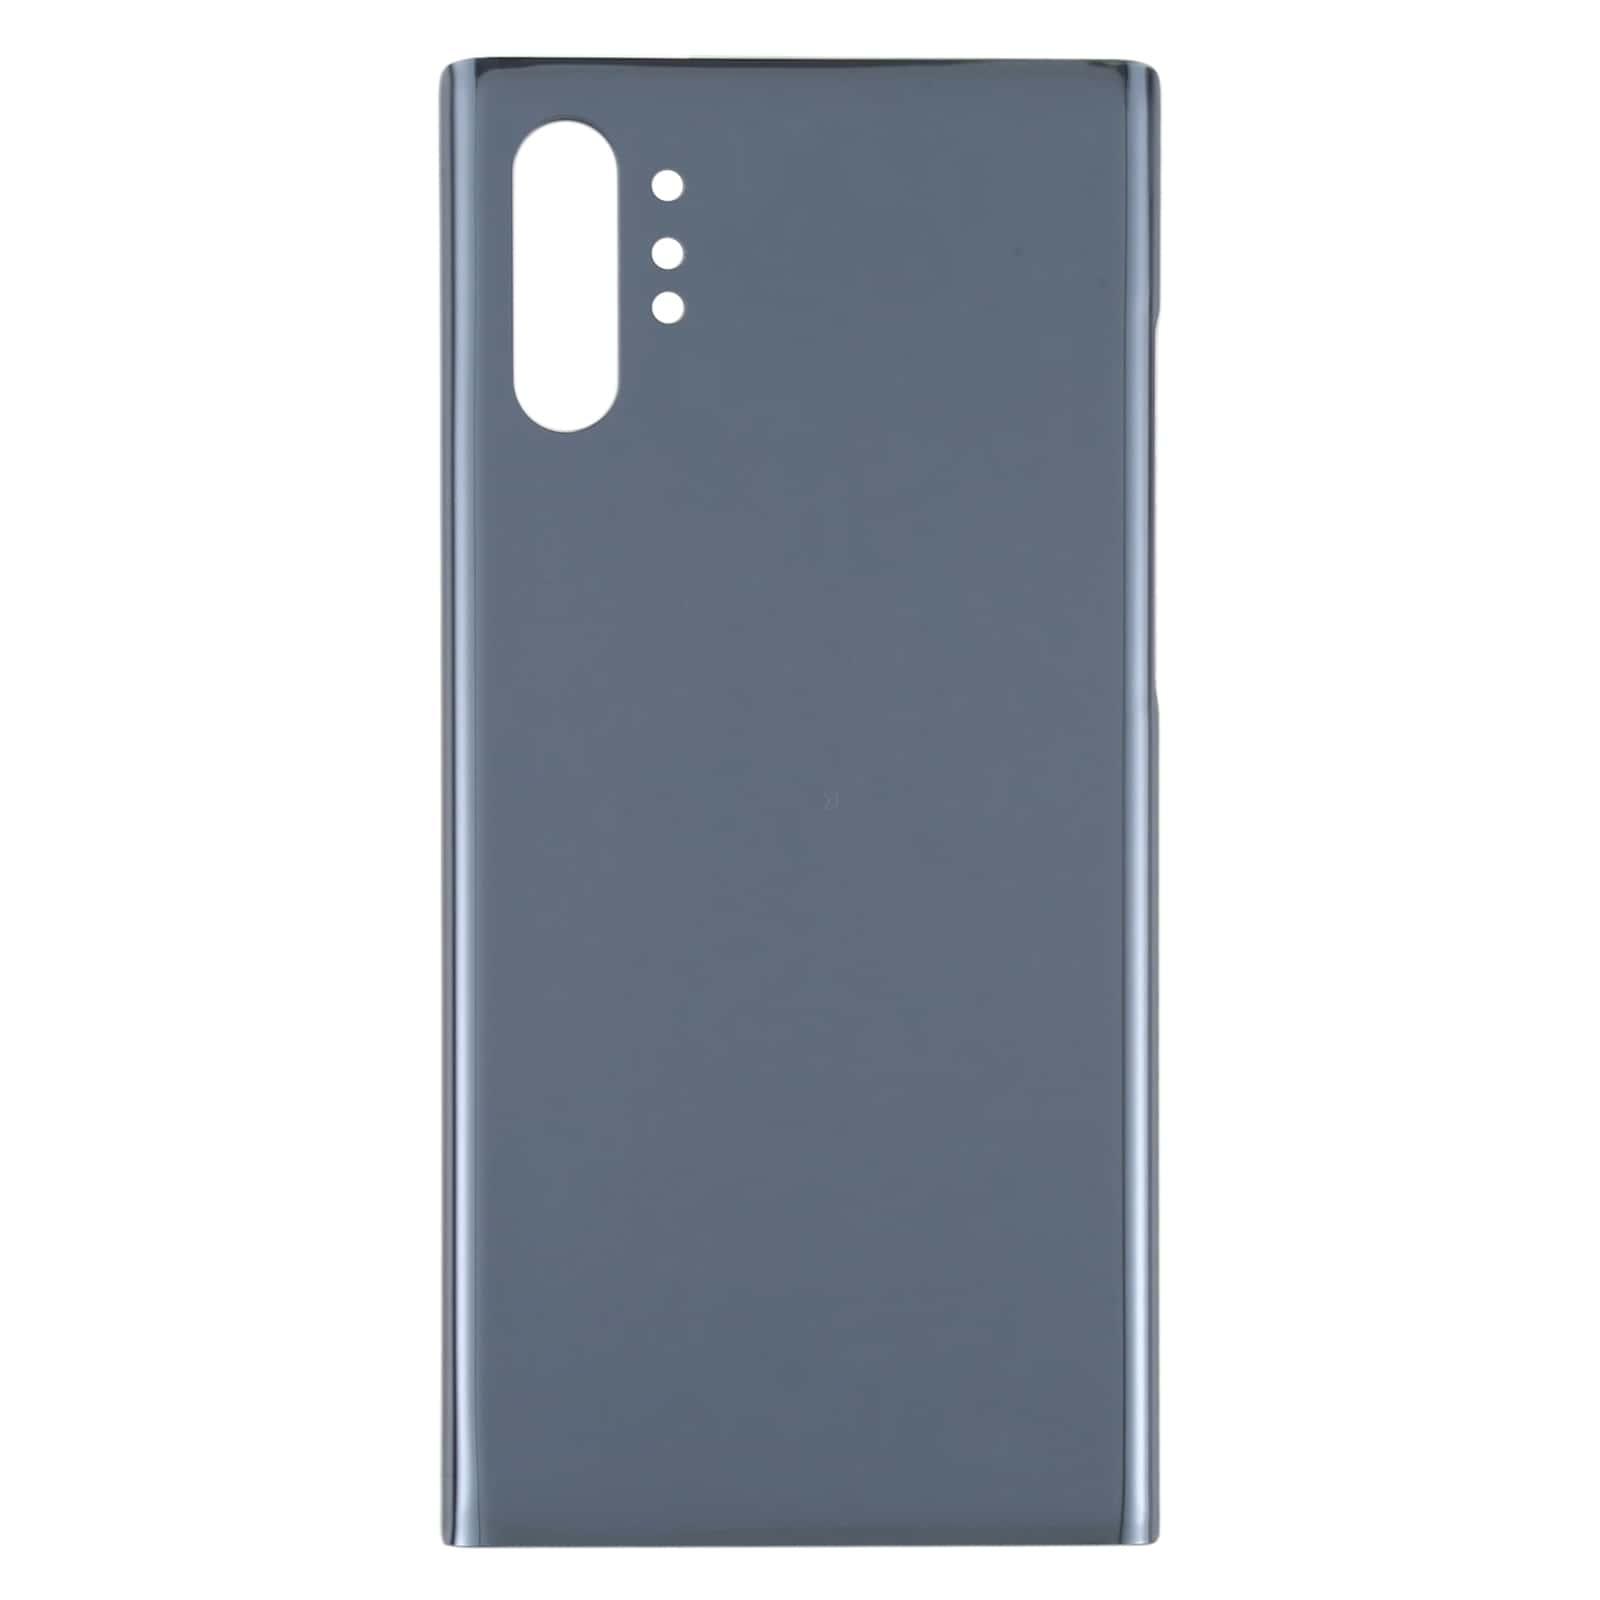 Back Glass Panel for  Samsung Galaxy Note10 Plus Black